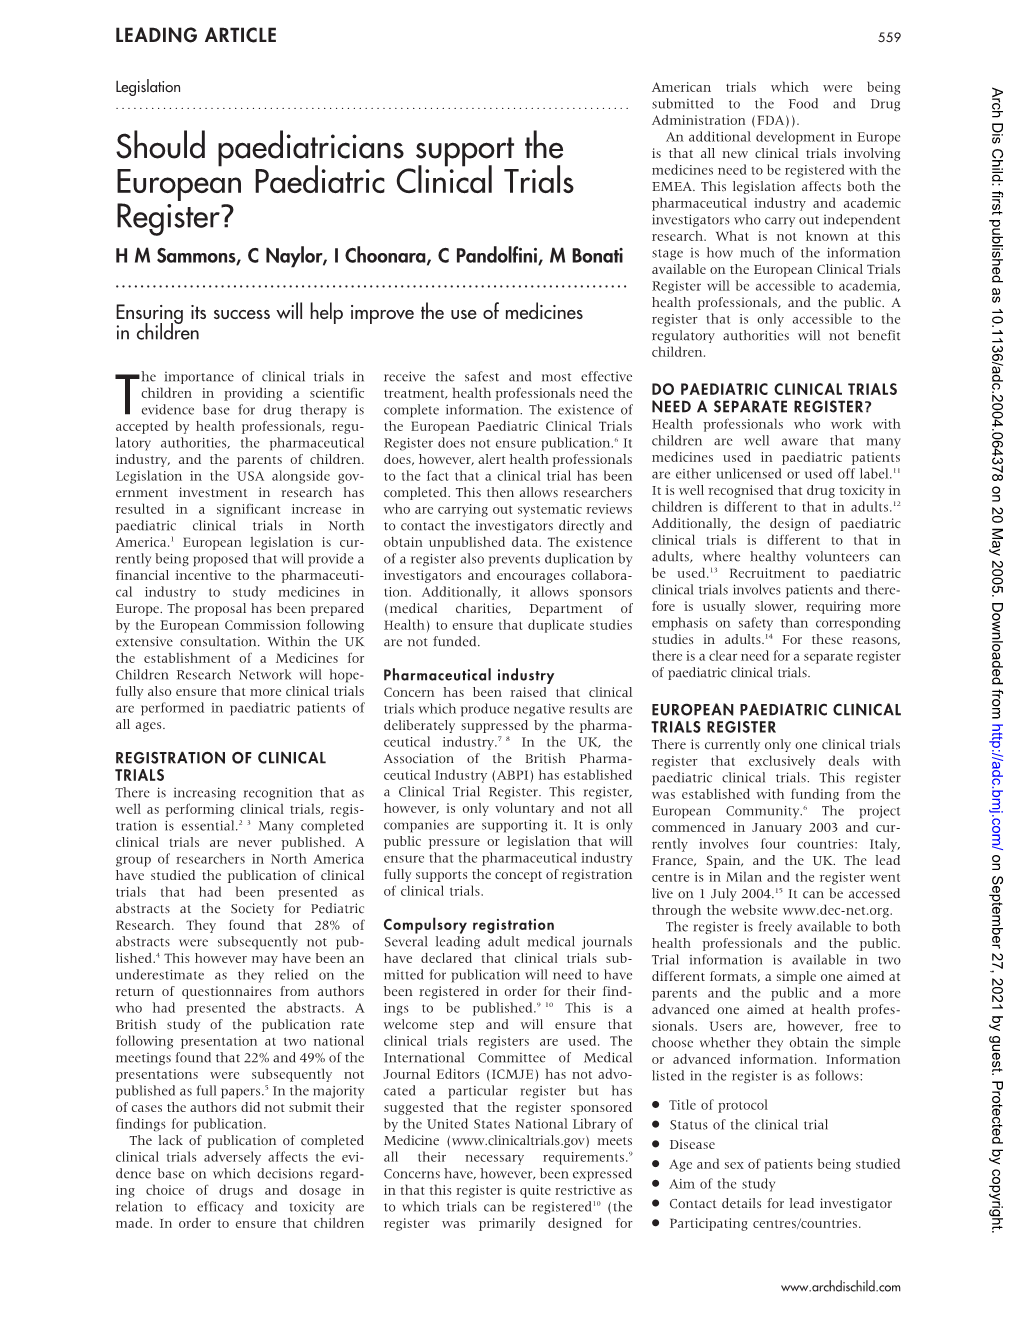 Should Paediatricians Support the European Paediatric Clinical Trials